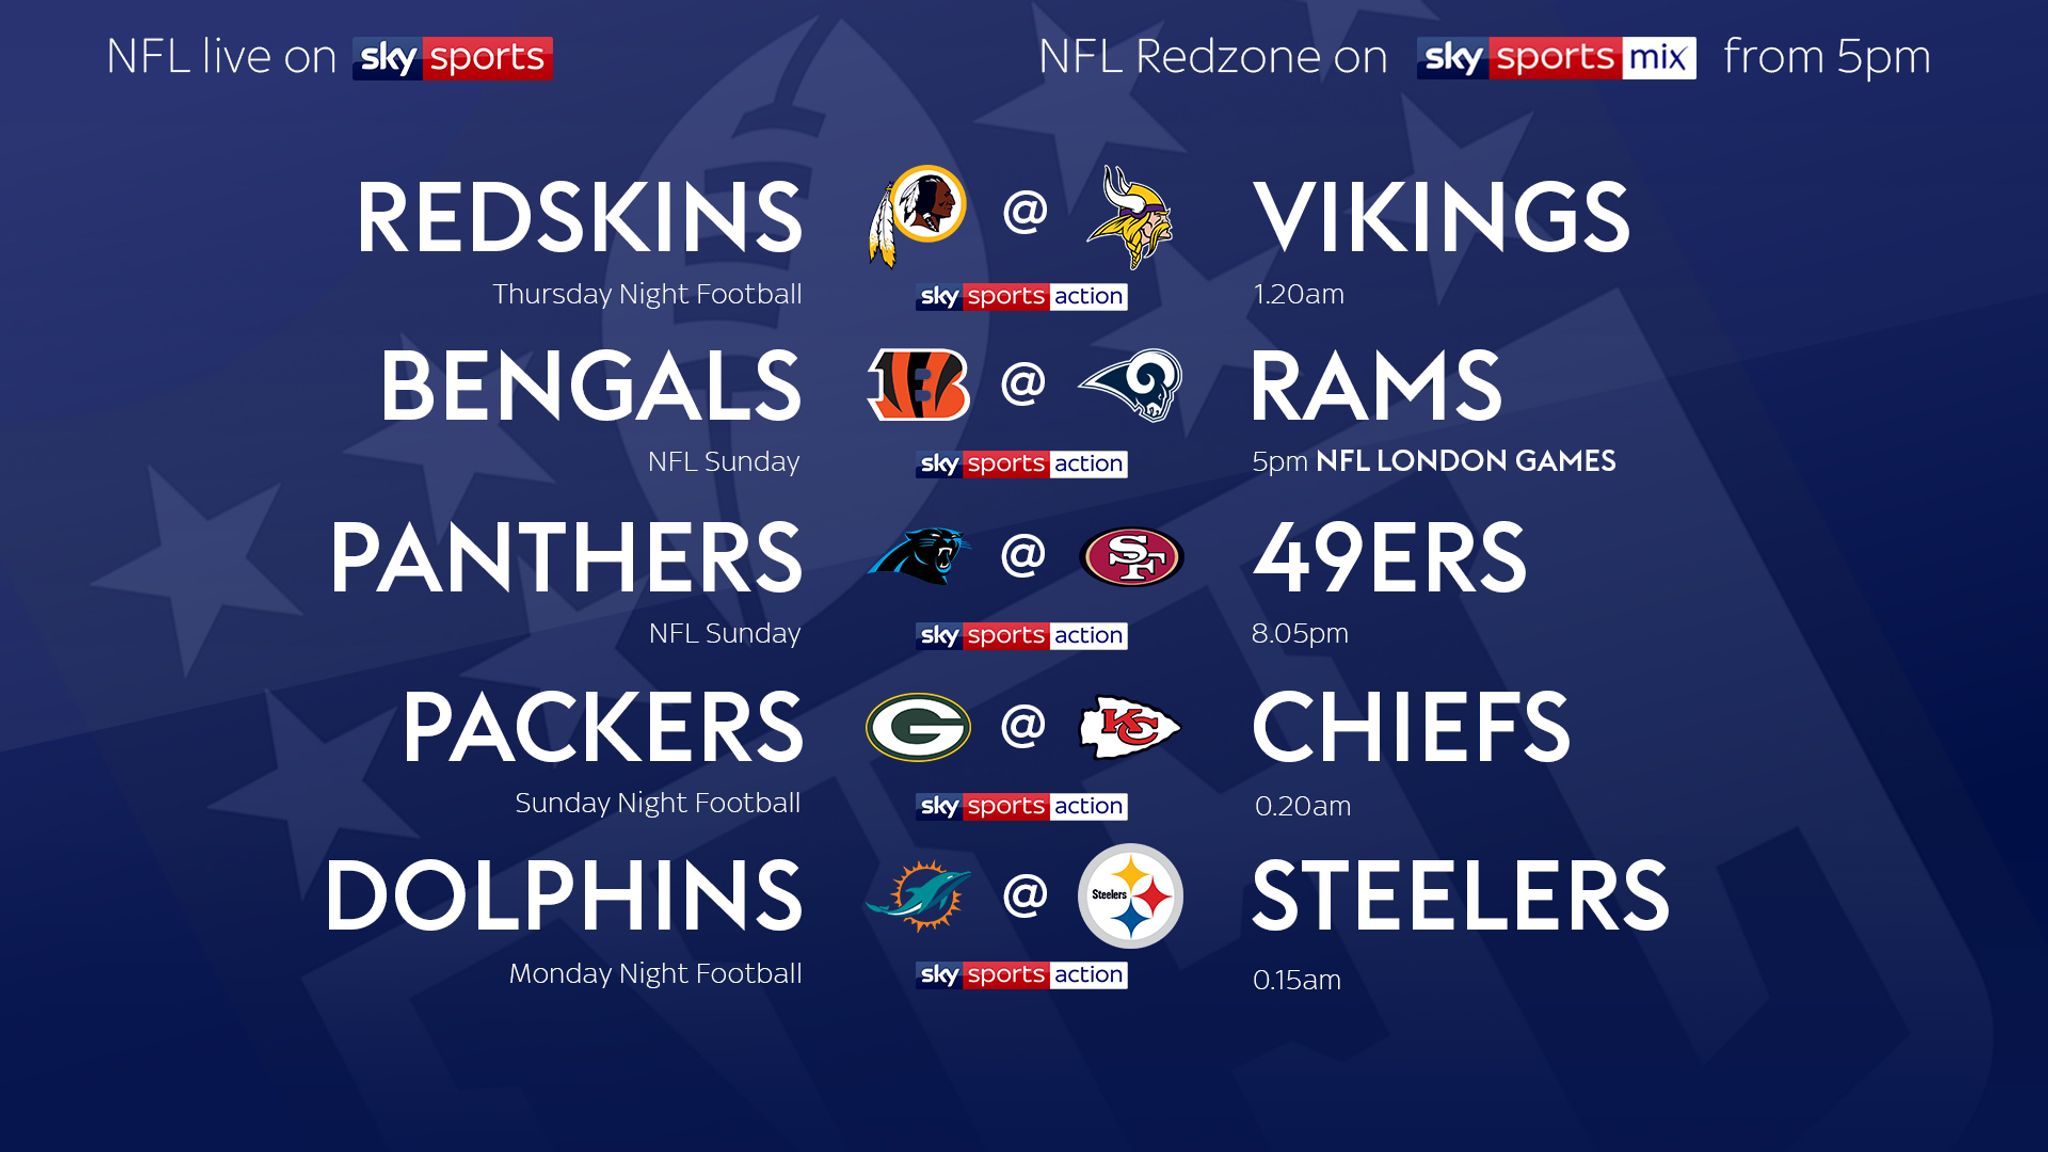 Bengals-Rams at Wembley and 49ers host Panthers in NFL Week Eight